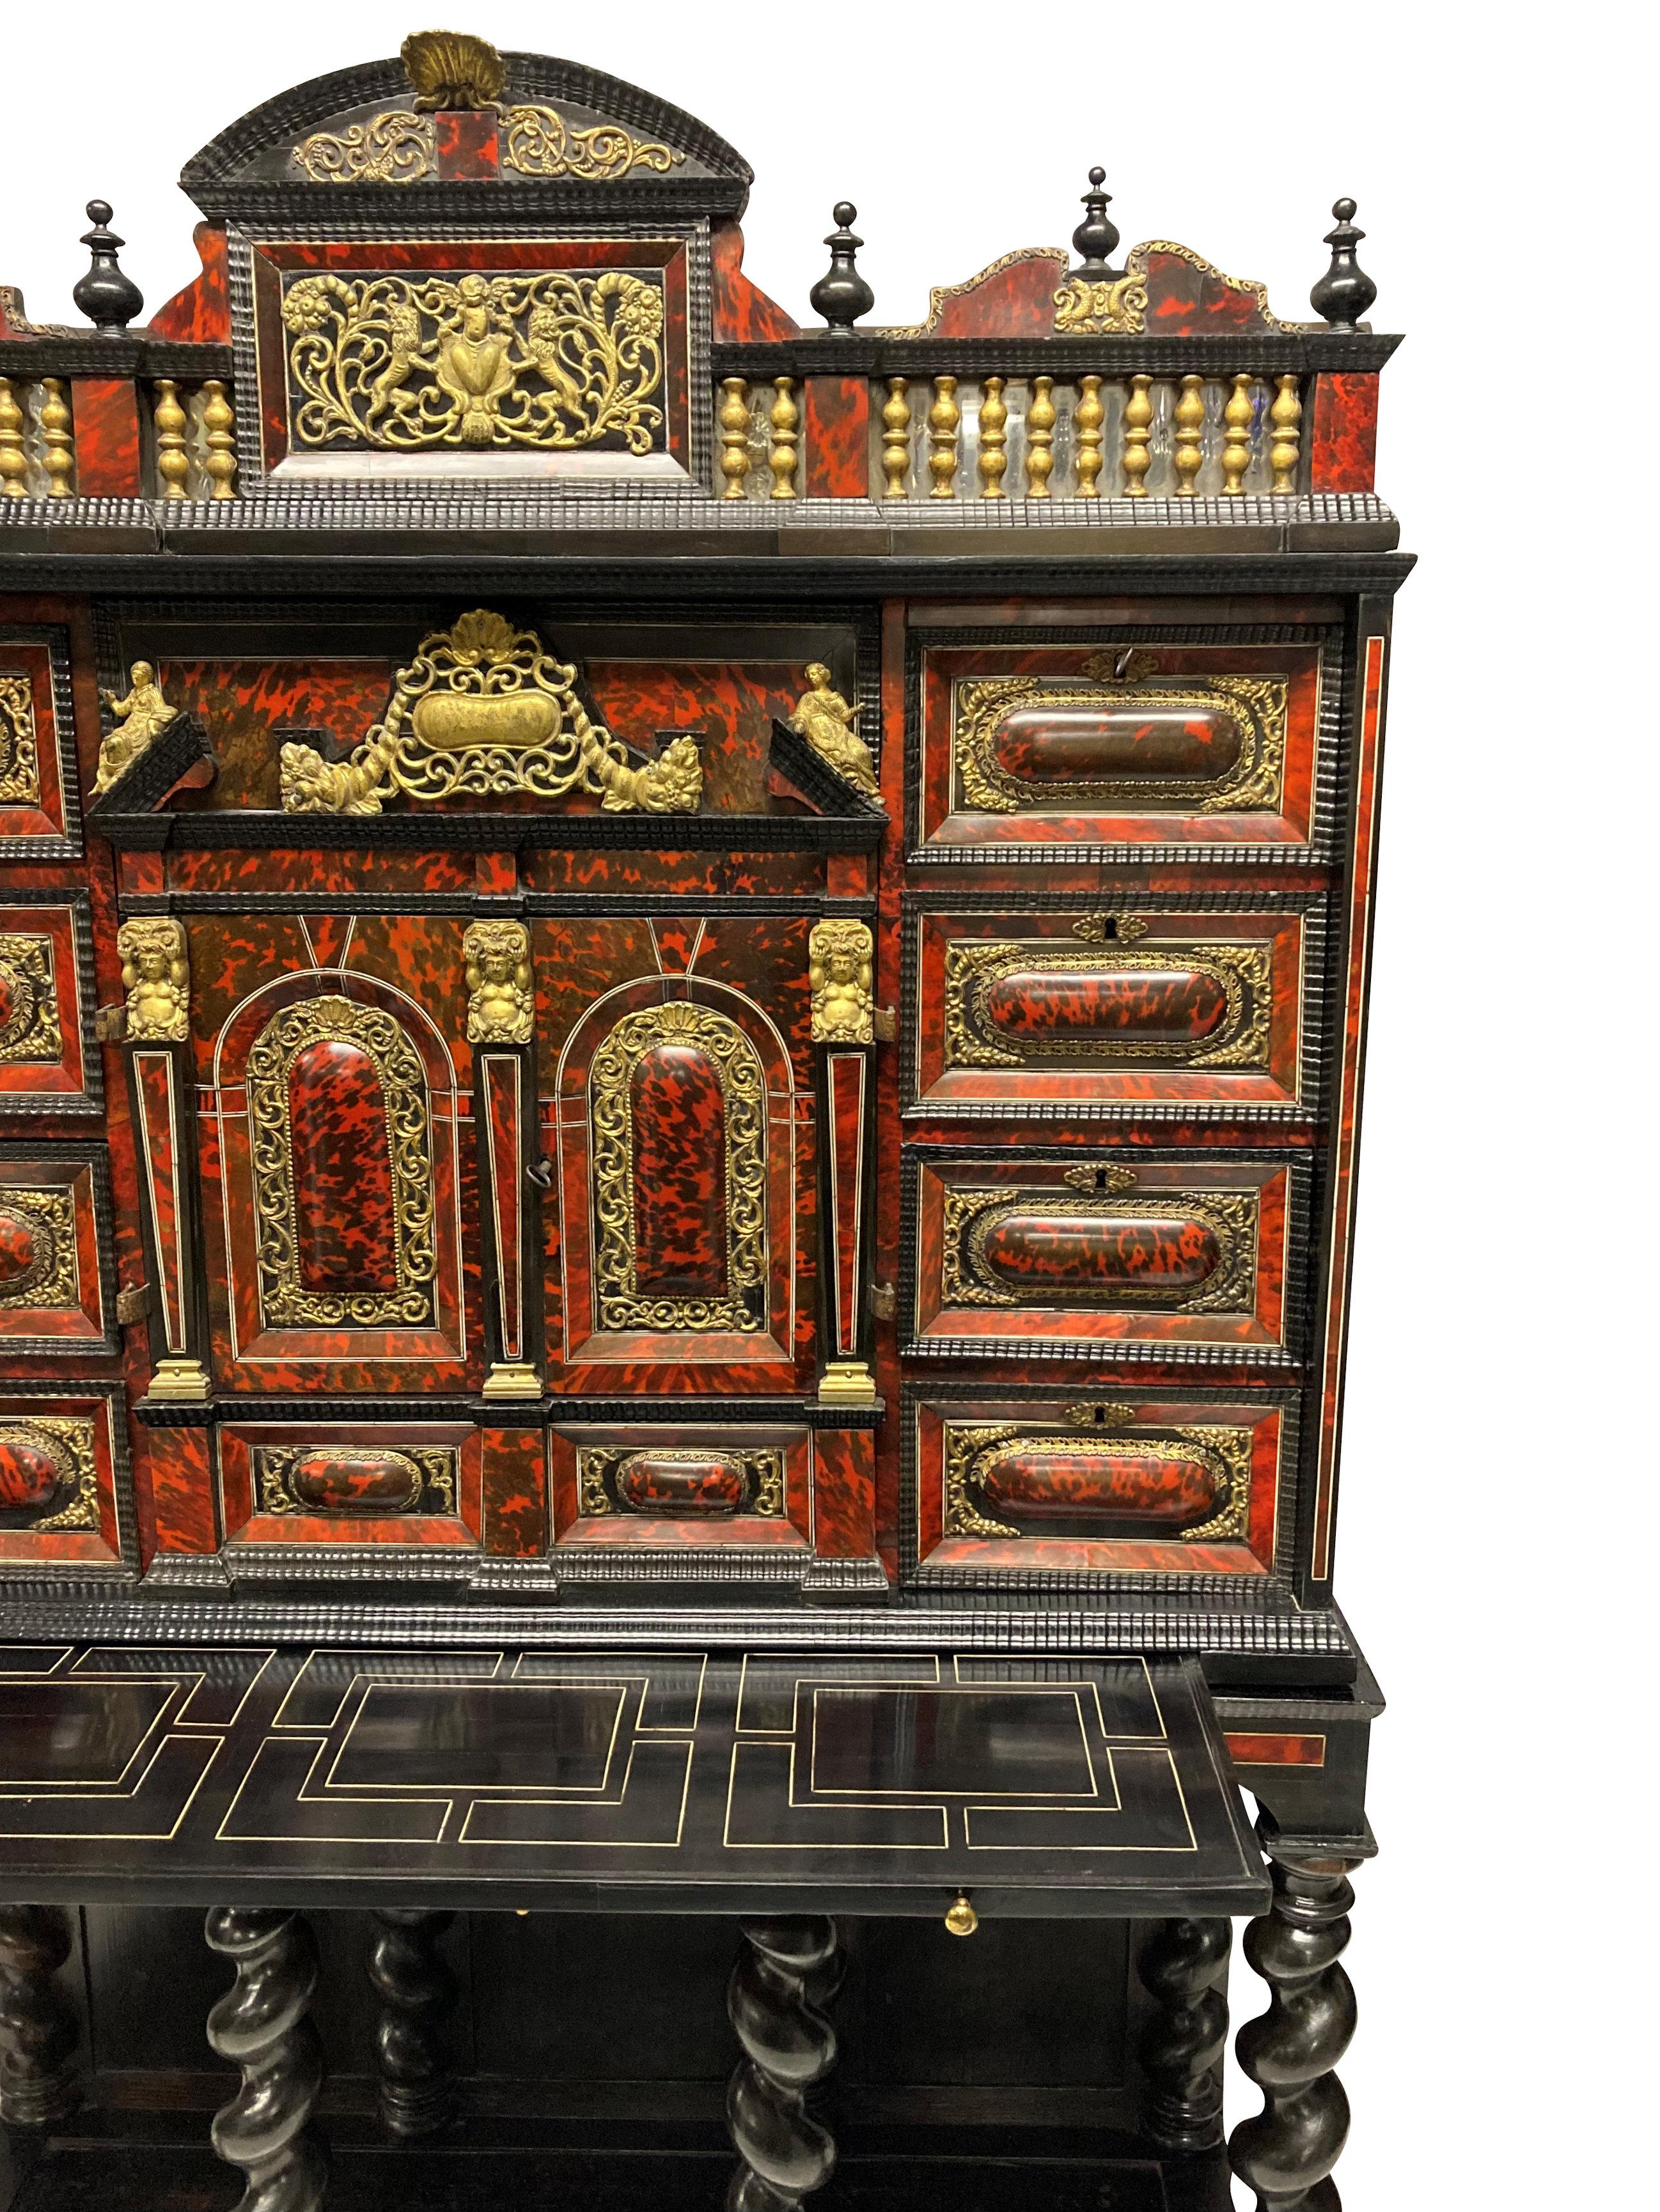 A rare and of fine quality, late XVII Century Flemish European ormolu mounted ebony and red tortoiseshell cabinet on stand, of architectural form, crowned with an architectural, galleried pediment. Below: two central finely decorated doors opening